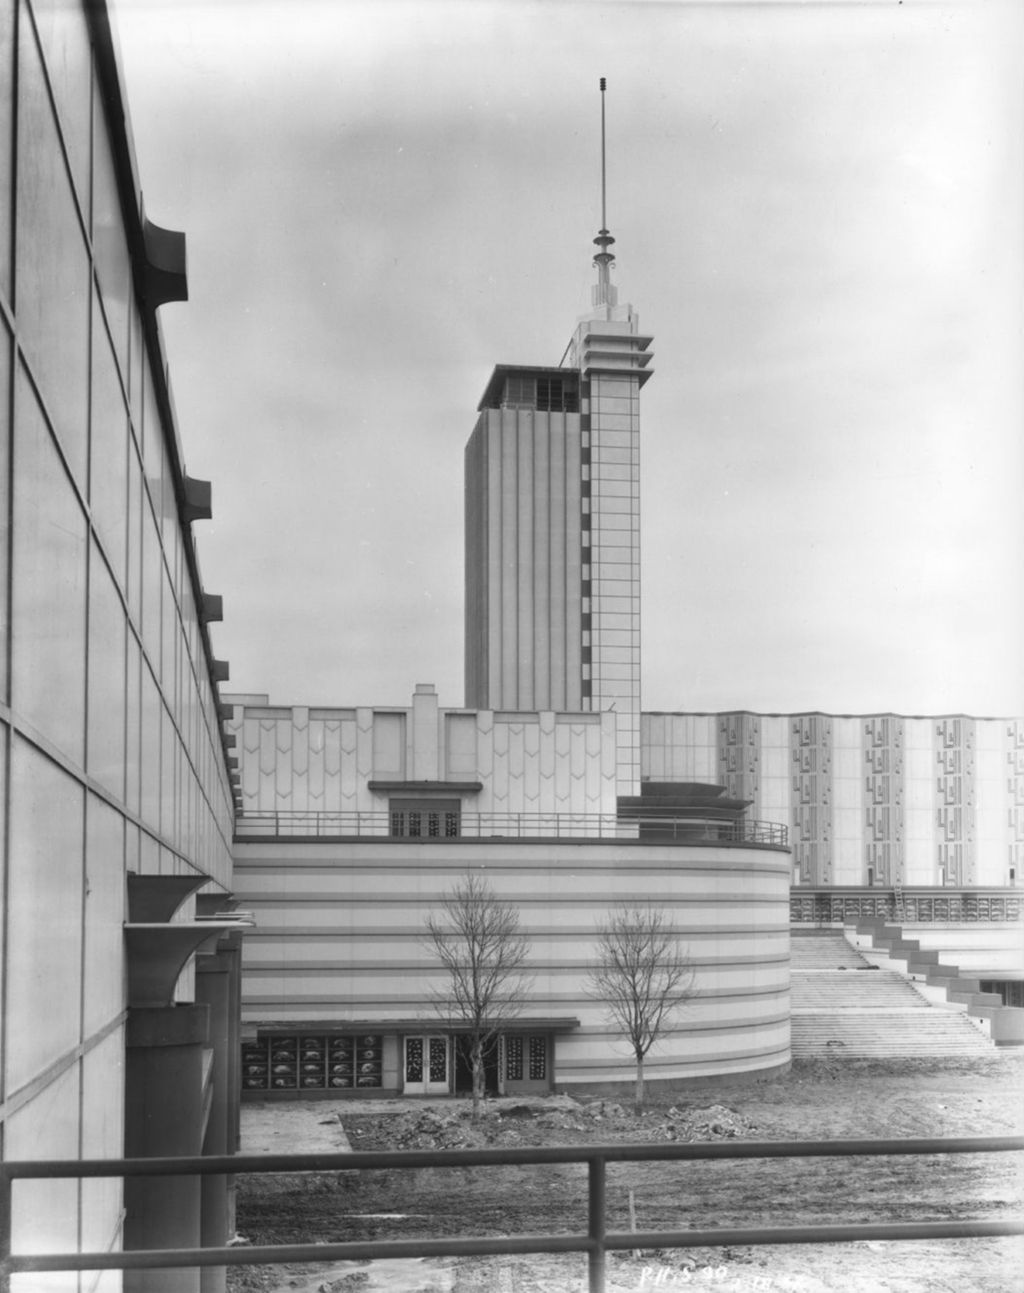 Miniature of View of the Carillon Tower at the Hall of Science building